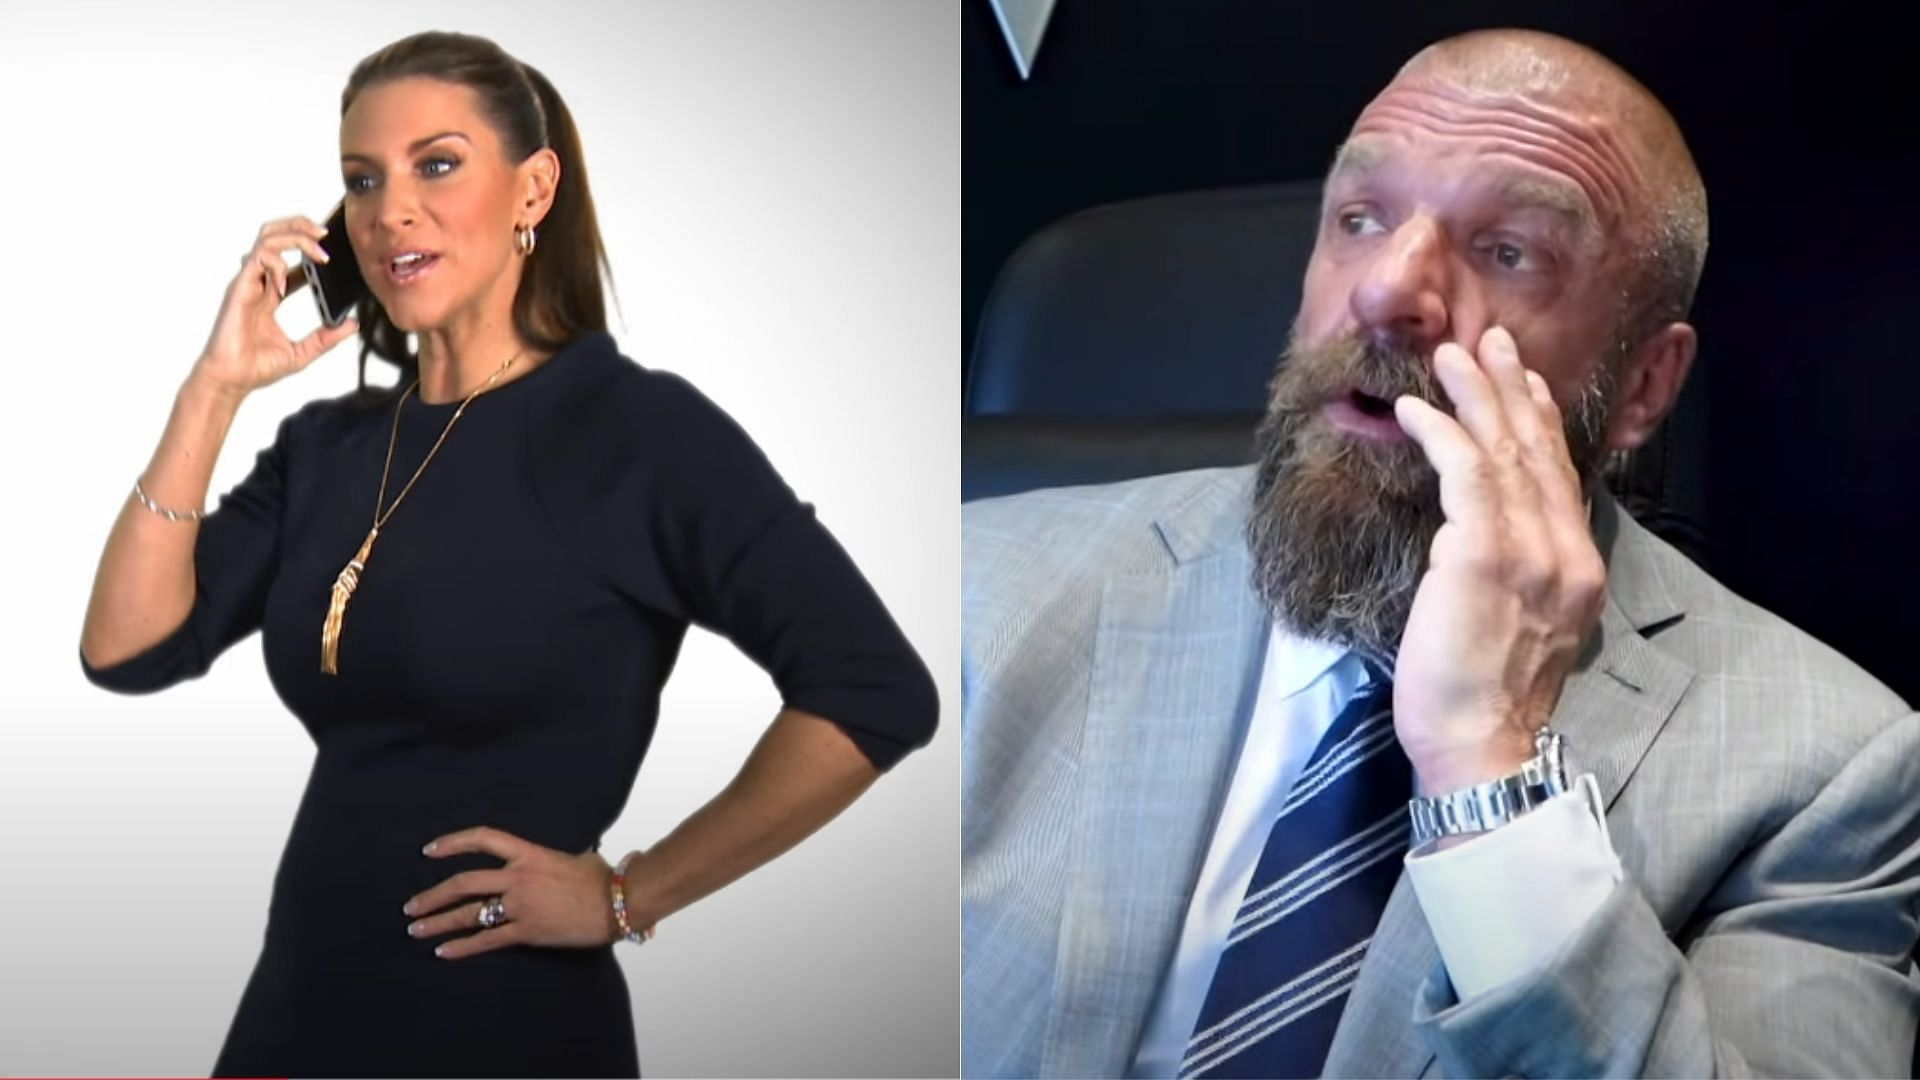 Stephanie McMahon (left) and Triple H (right)